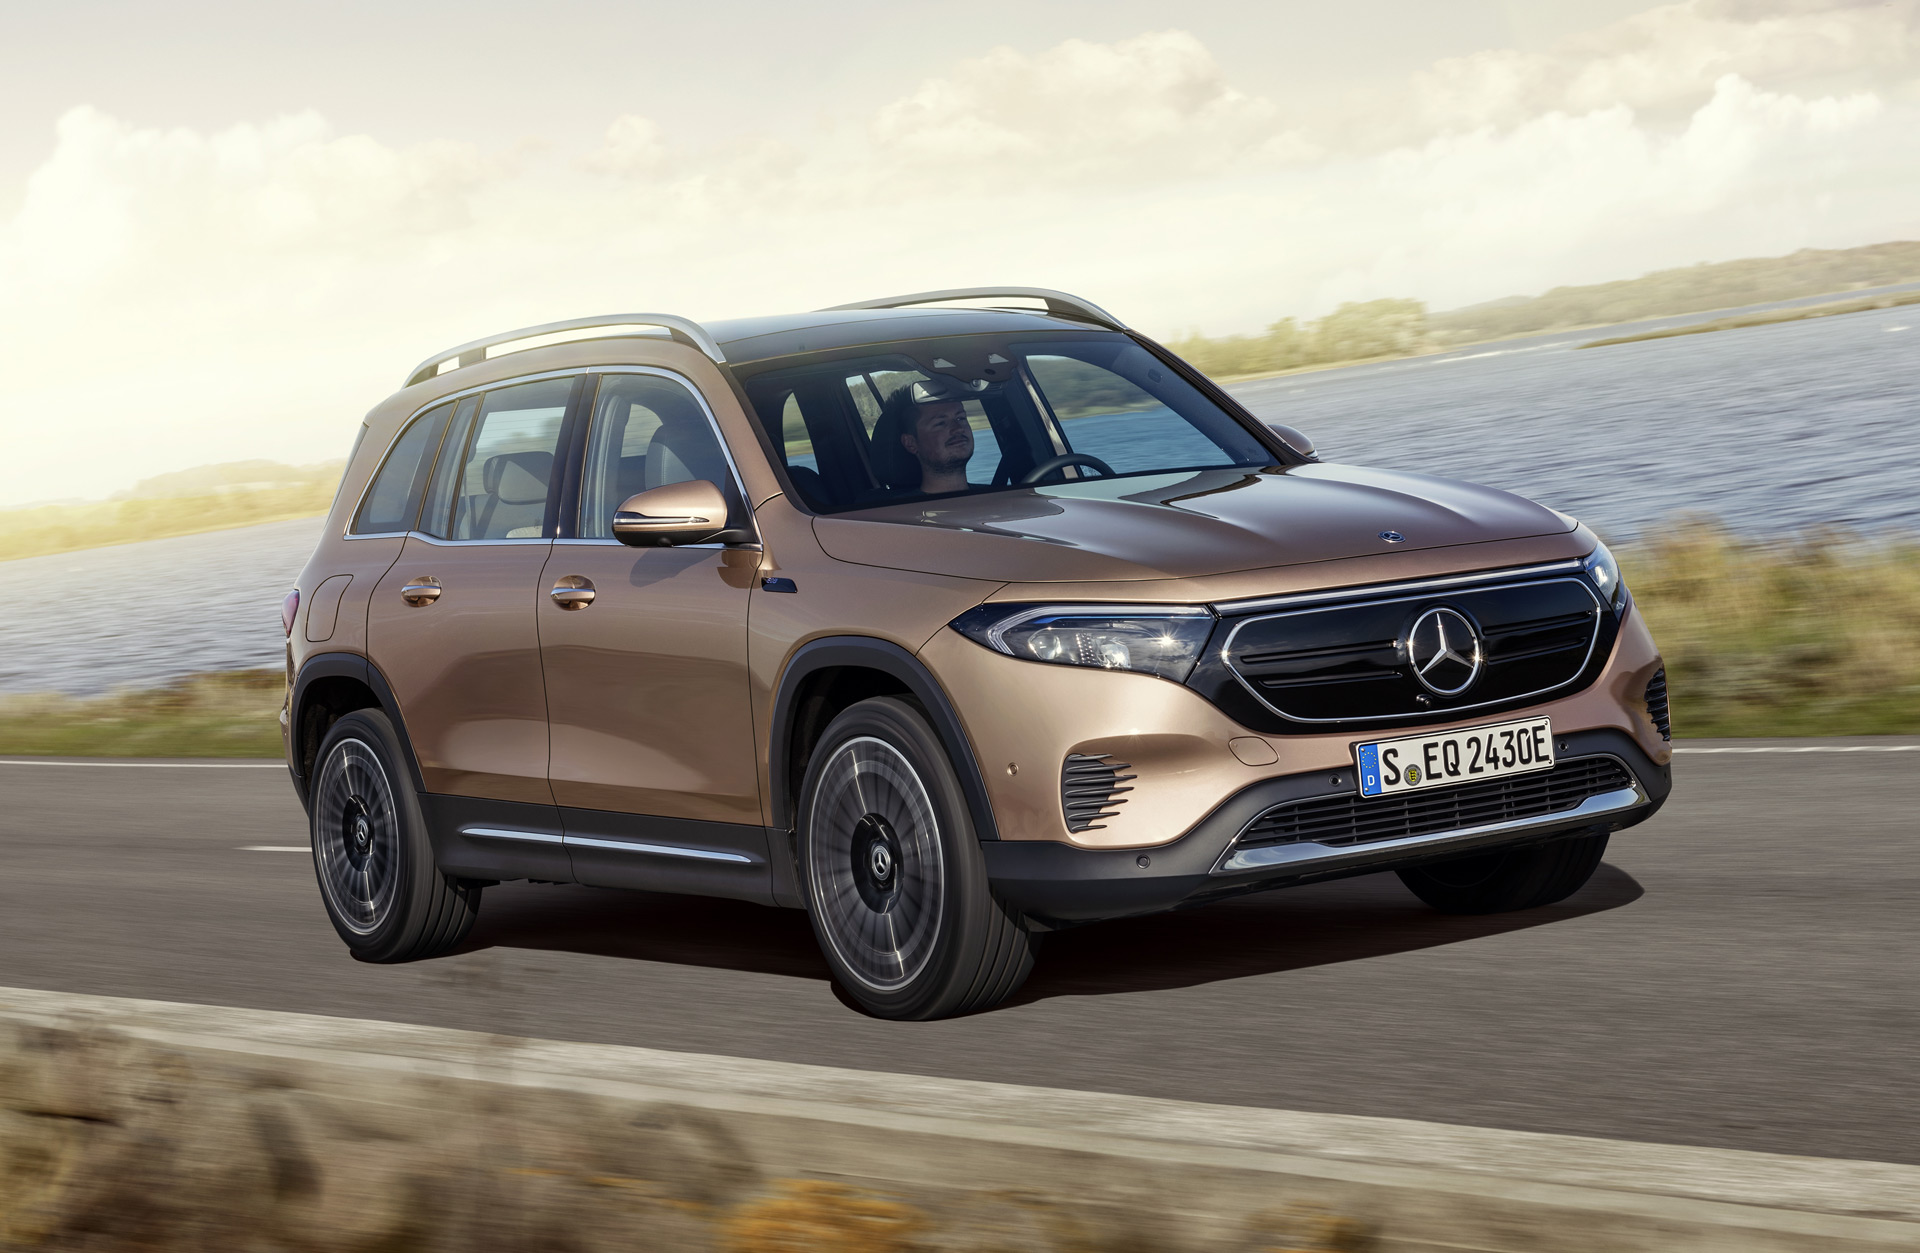 Preview: Mercedes-Benz EQB electric crossover coming in 2022